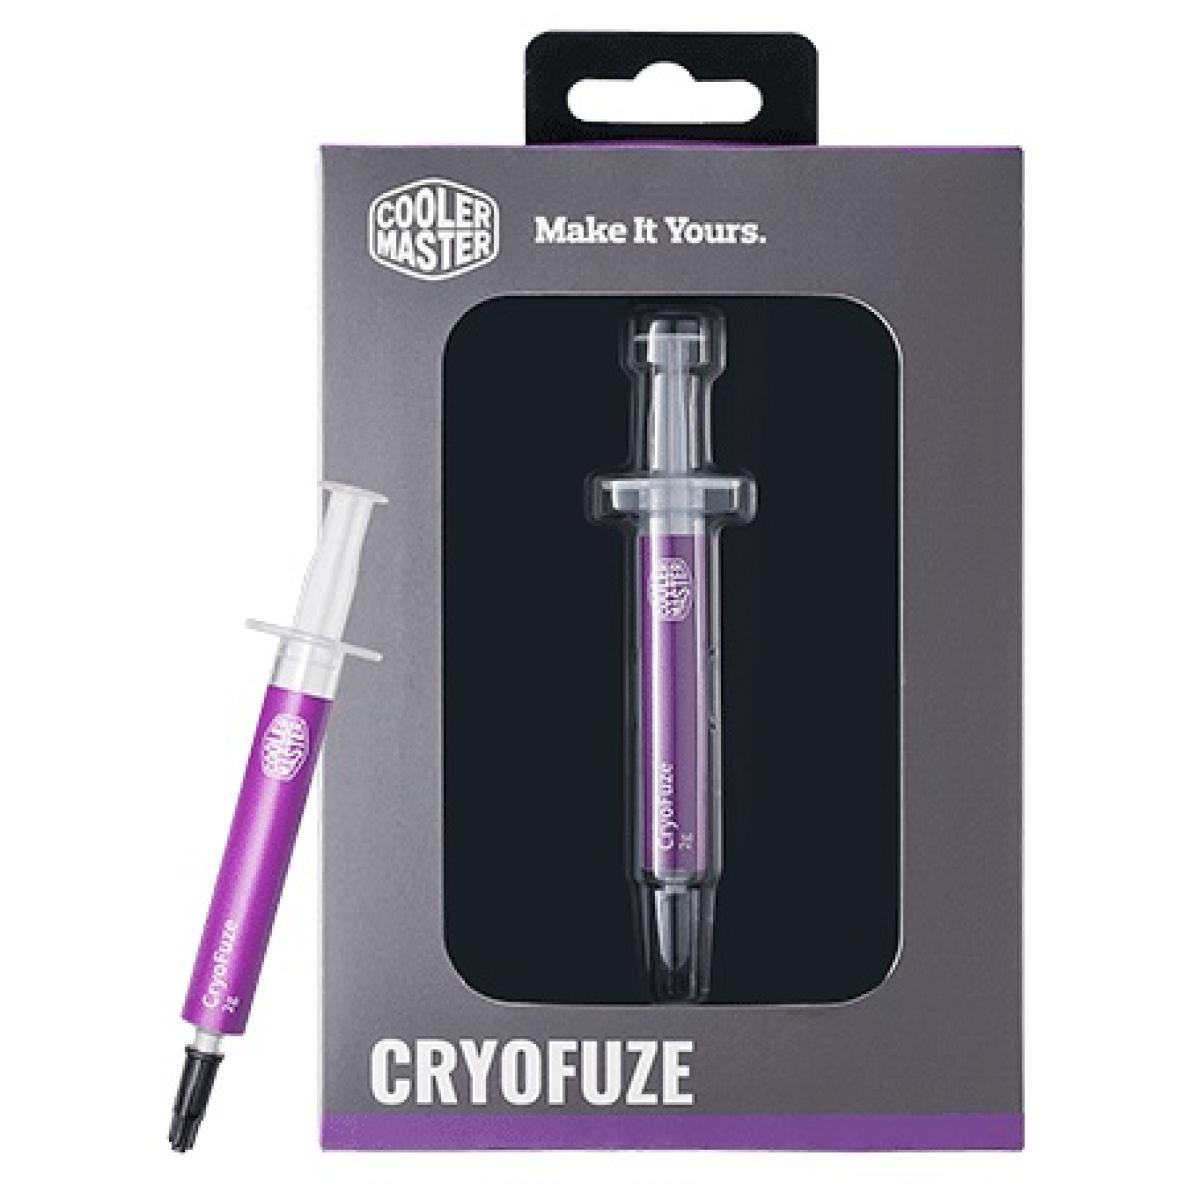 Cooler Master CRYOFUZE Thermal Paste (2g)